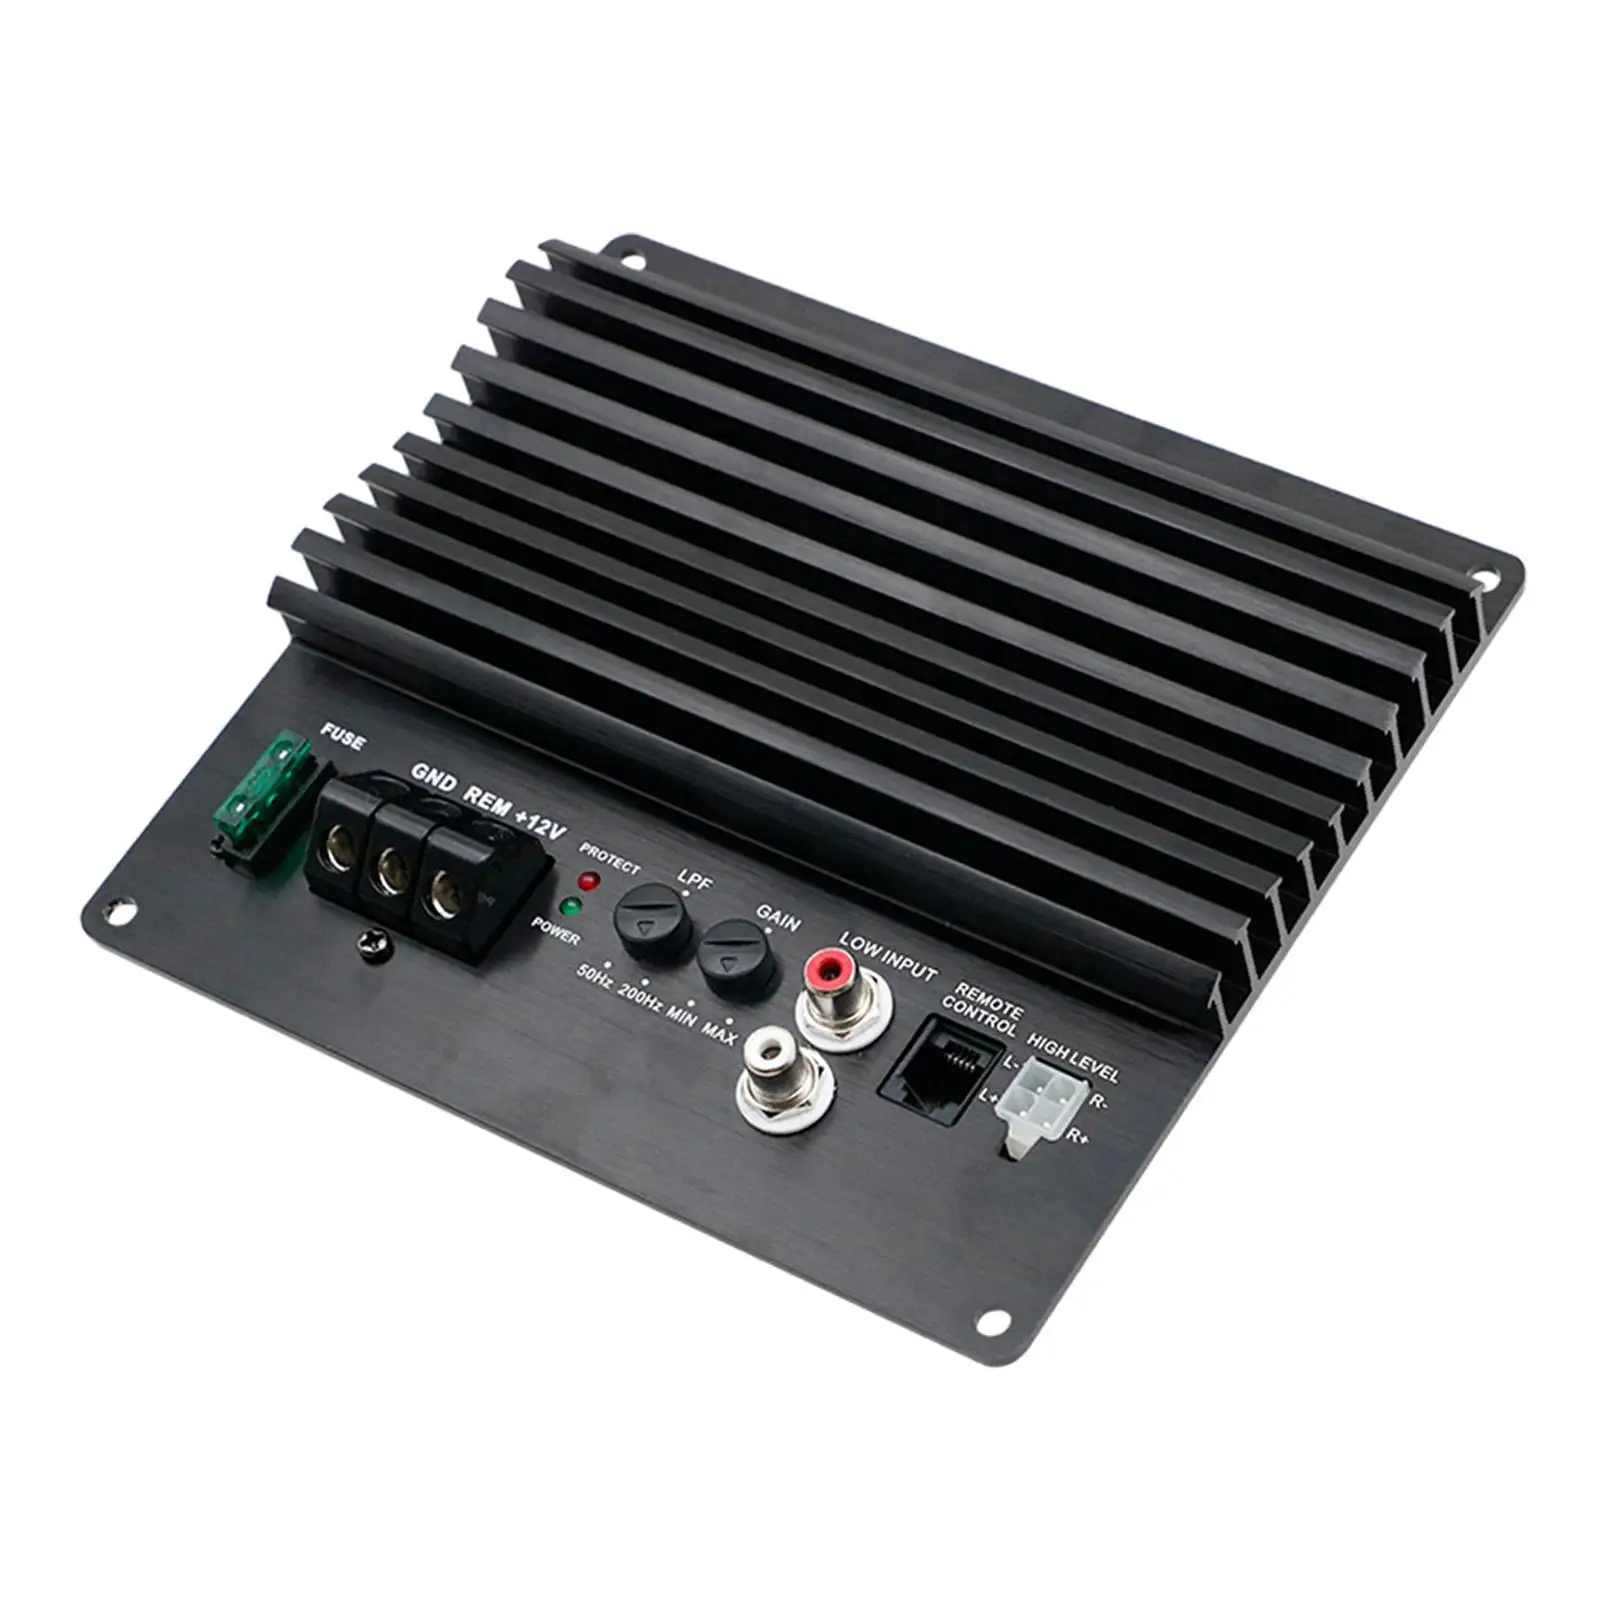 Audio Amplifier 120W High Power Bass Audio Subwoofer Amp Car Audio for Car Speaker Sound System Crossover Network Car Speakers